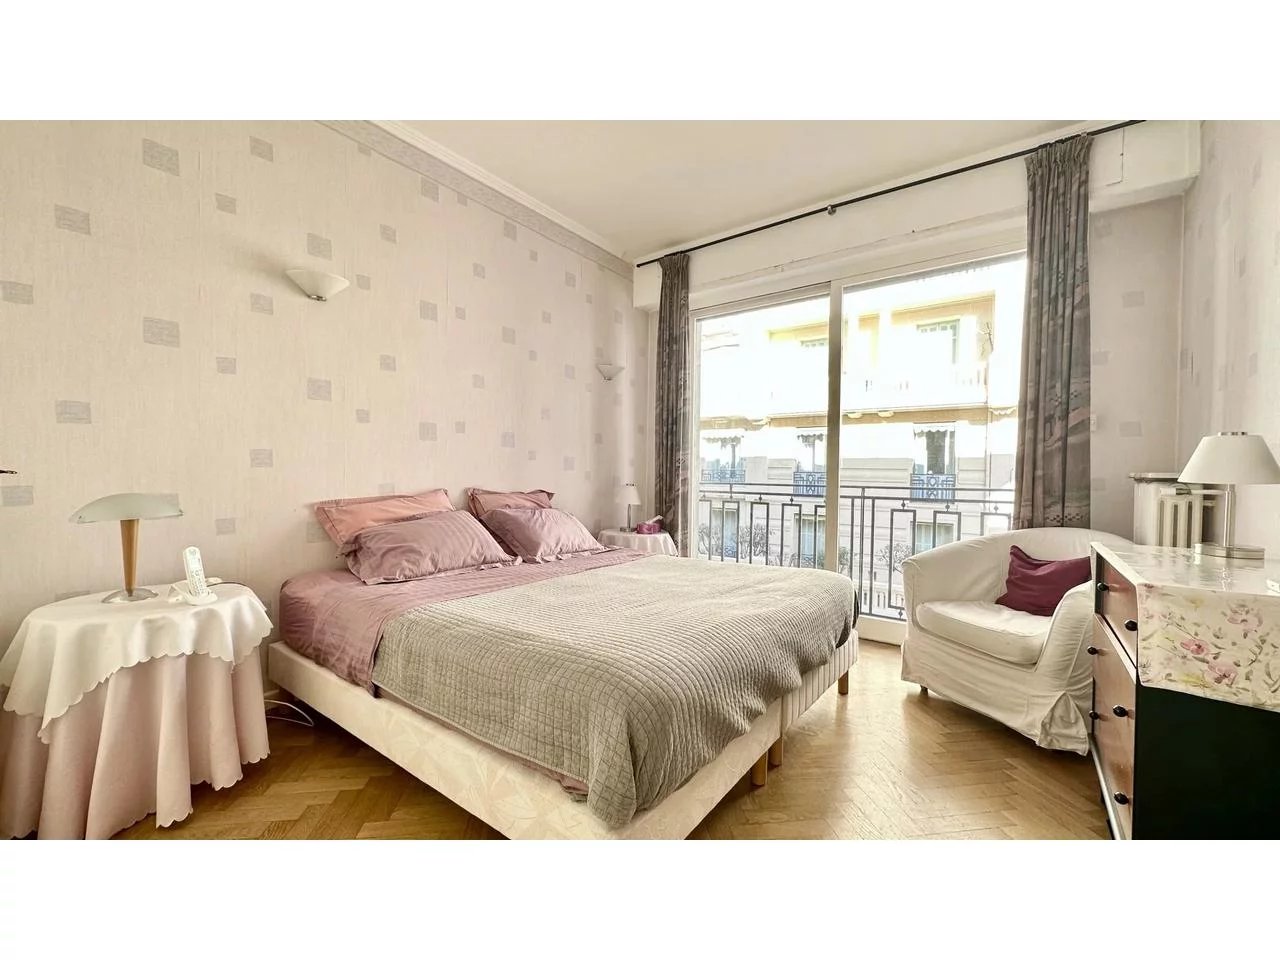 Appartement  3 Rooms 66.08m2  for sale   379 000 €